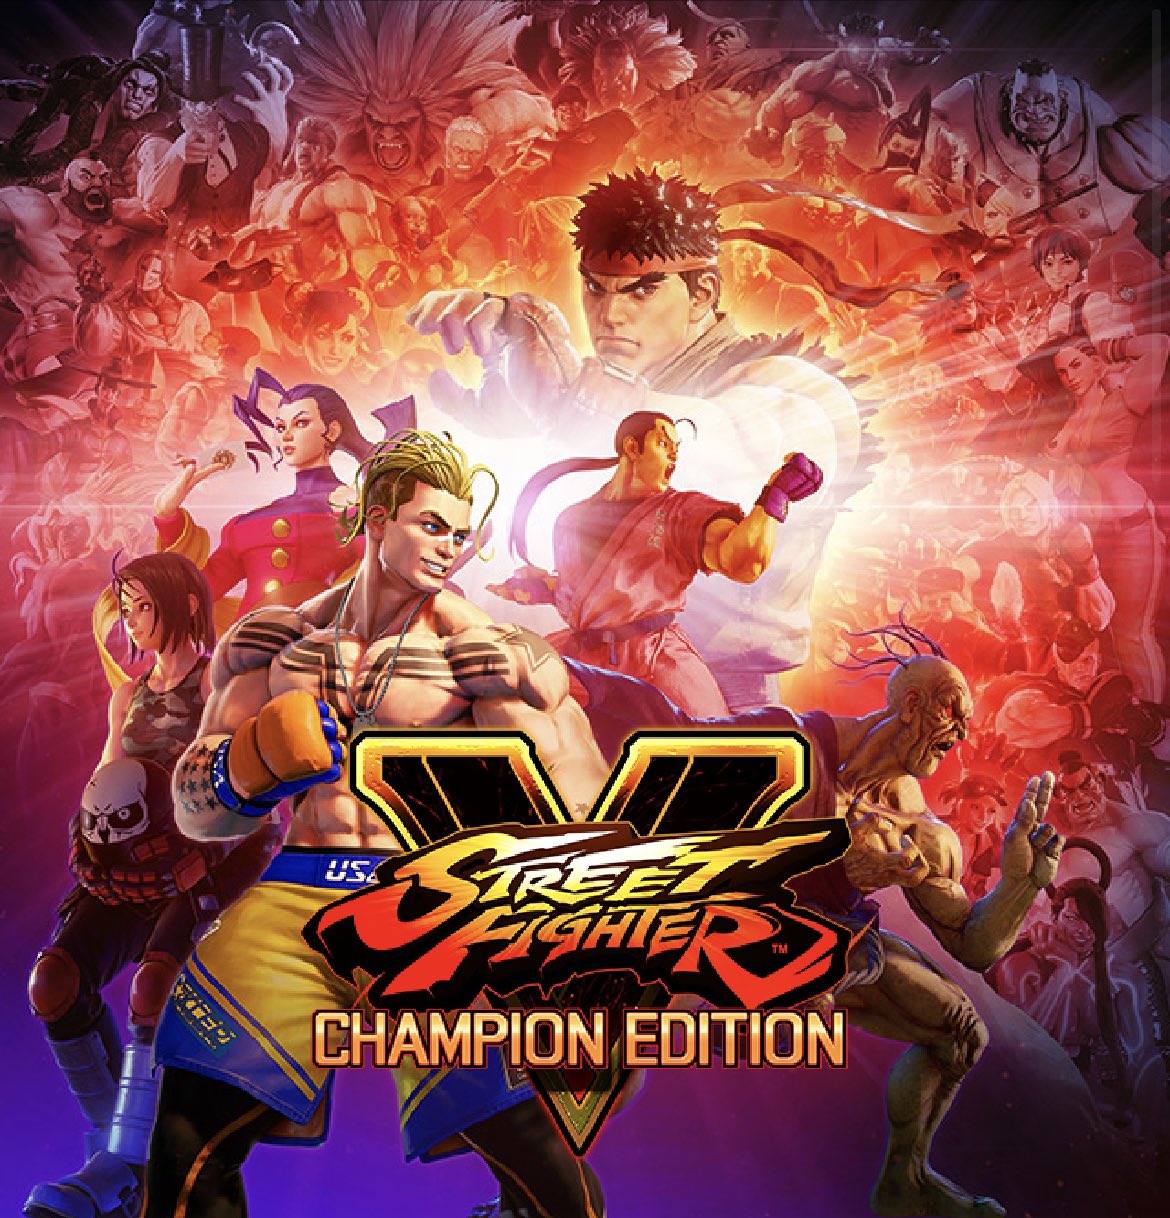 Street Fighter V: Champion Edition Will Be Getting Five New Fighters